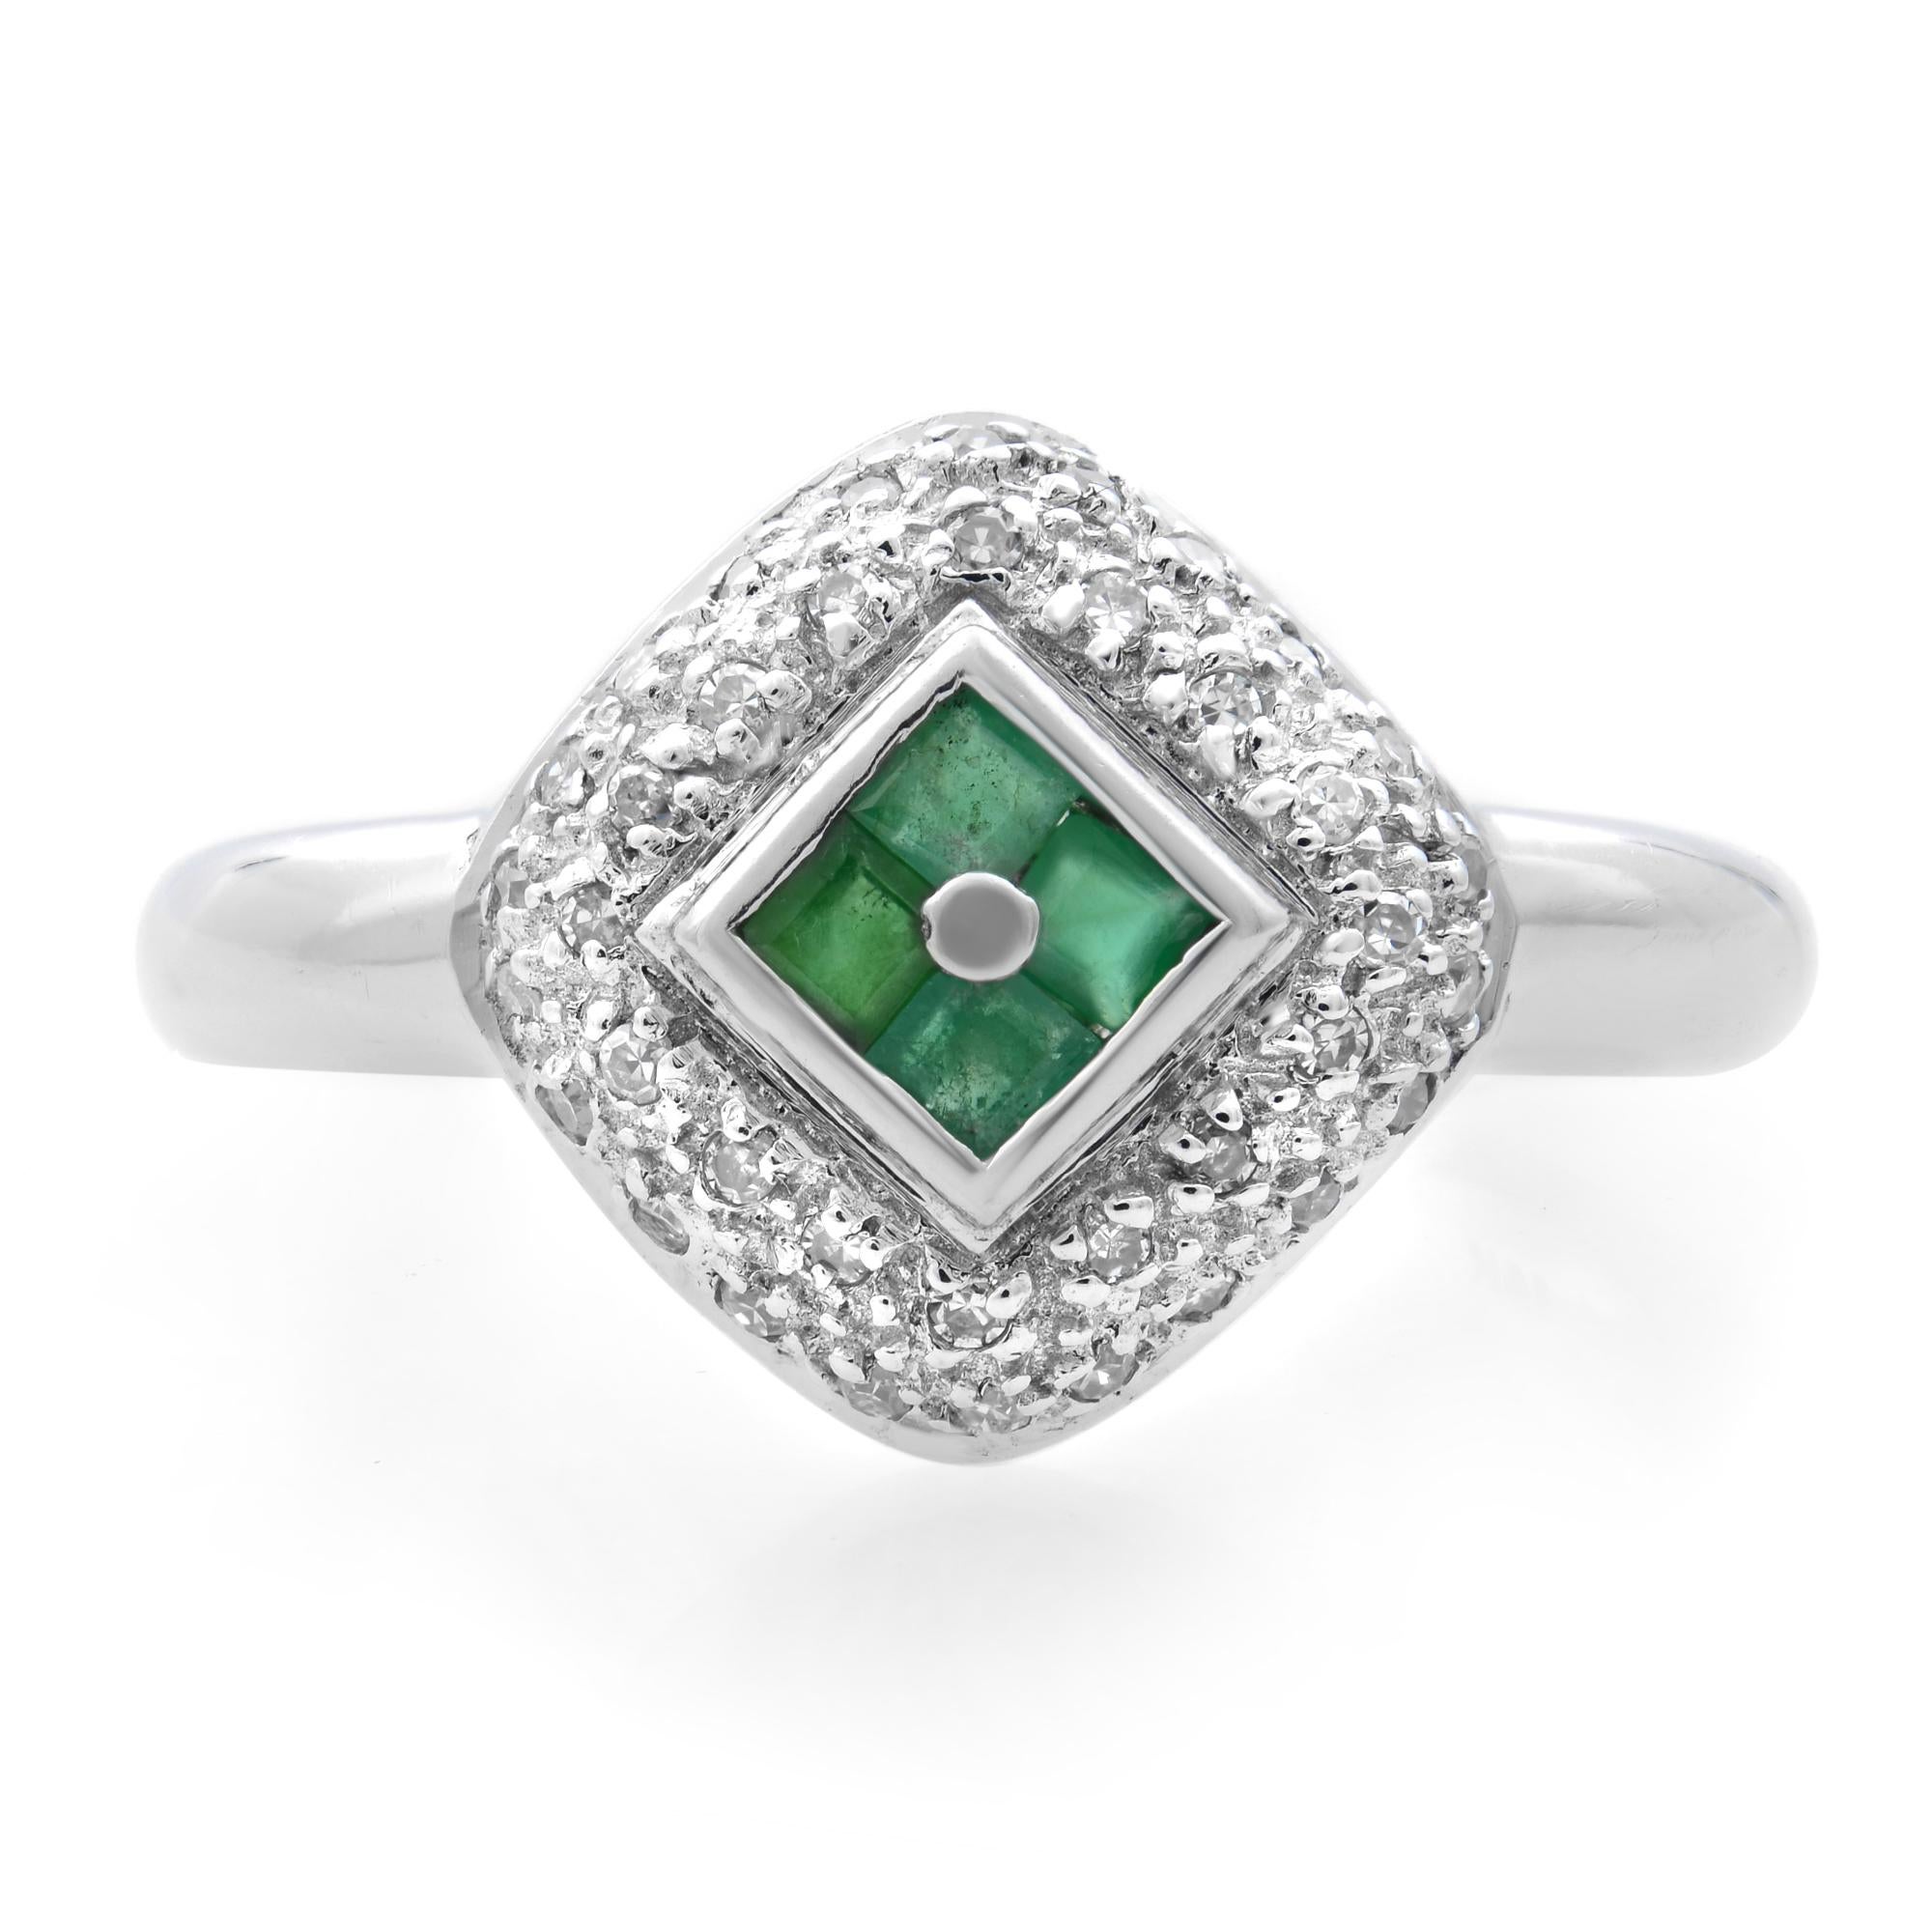 This beautiful ladies ring is encrusted with 4 princess cut Green Emeralds weighing 0.20 carat and pave set round cut diamonds weighing 0.10 carat. Crafted in 14k white gold. Ring size: 6.5. Total weight: 3.66 grams. Great pre-owned condition. Comes